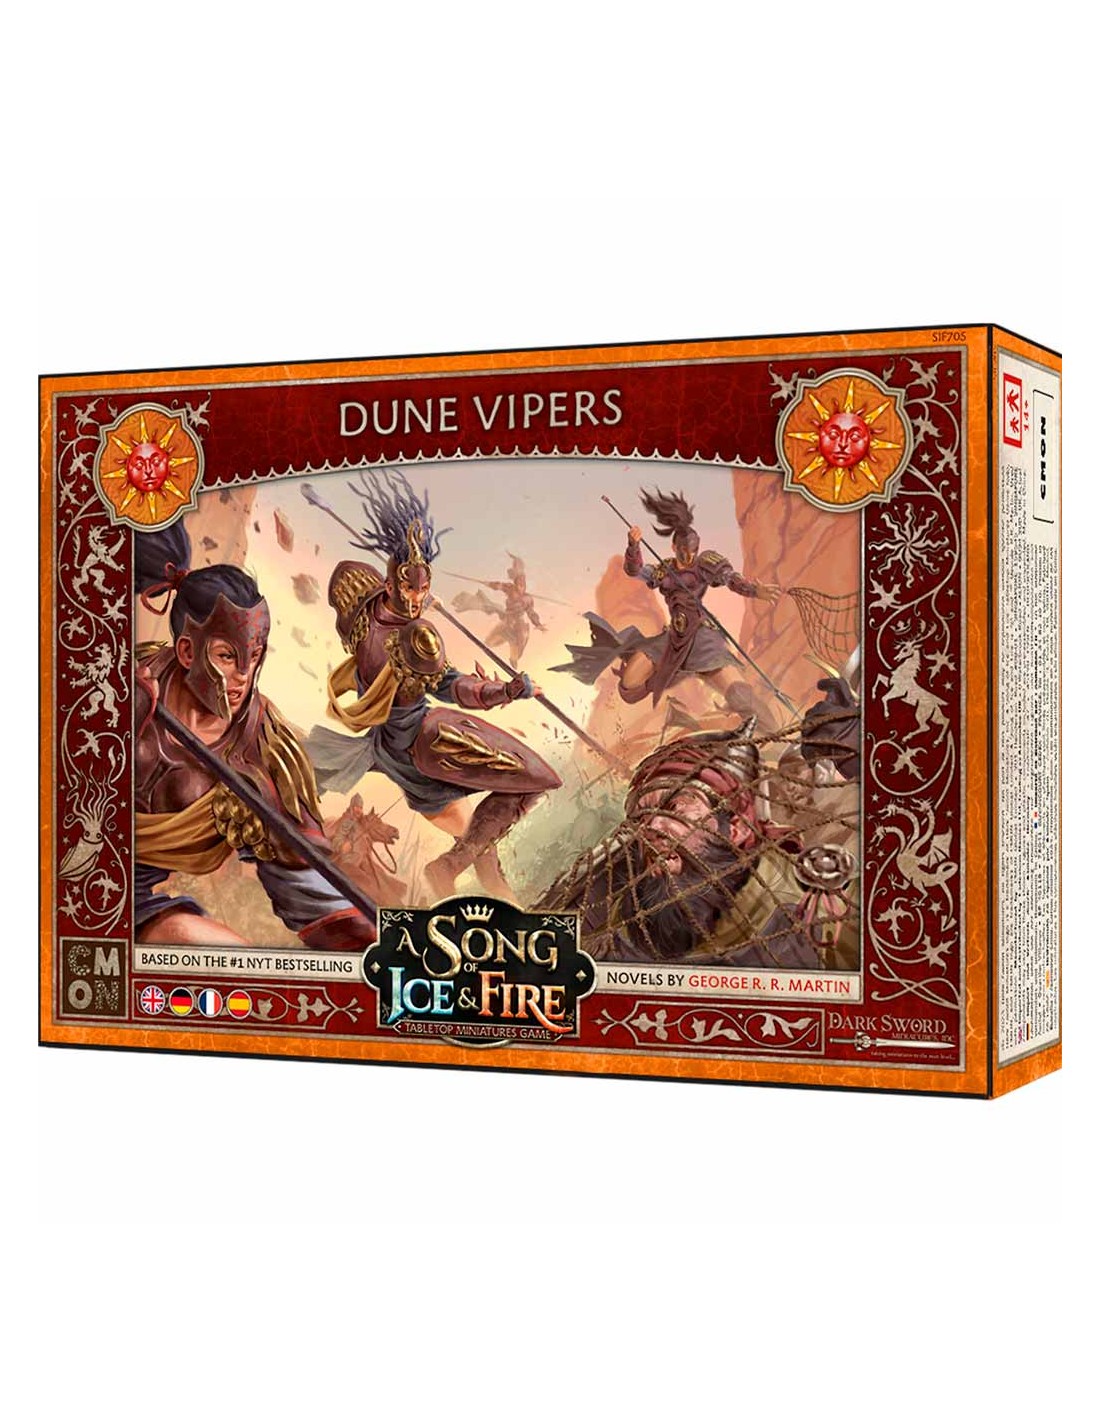 A Song of Ice & Fire: Dune Vipers (Multilingual)